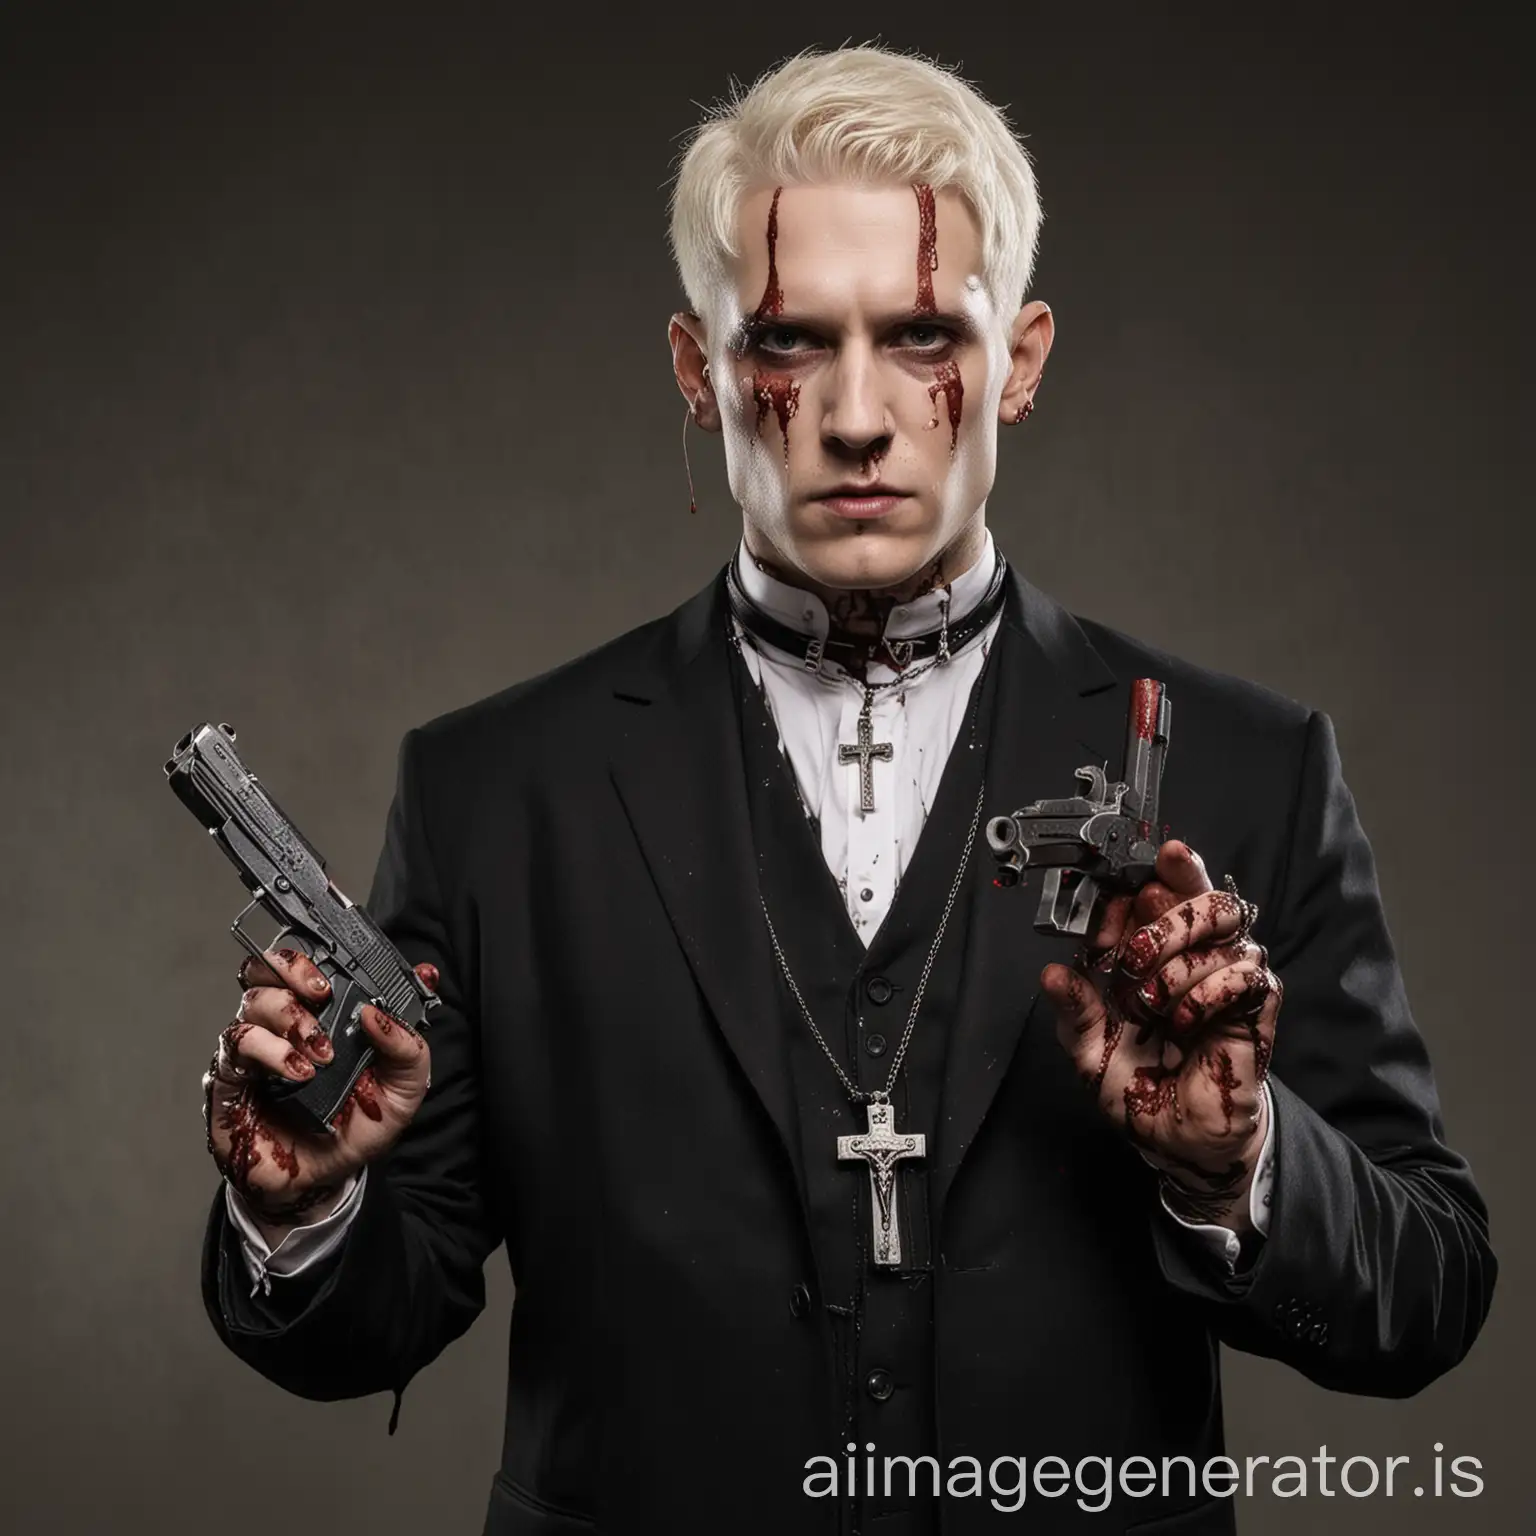 A white skin black suit christian with a cross necklace on his neck a 1911 pistol in his hand pointing at us and a cross around the other hand covered in so much blood 